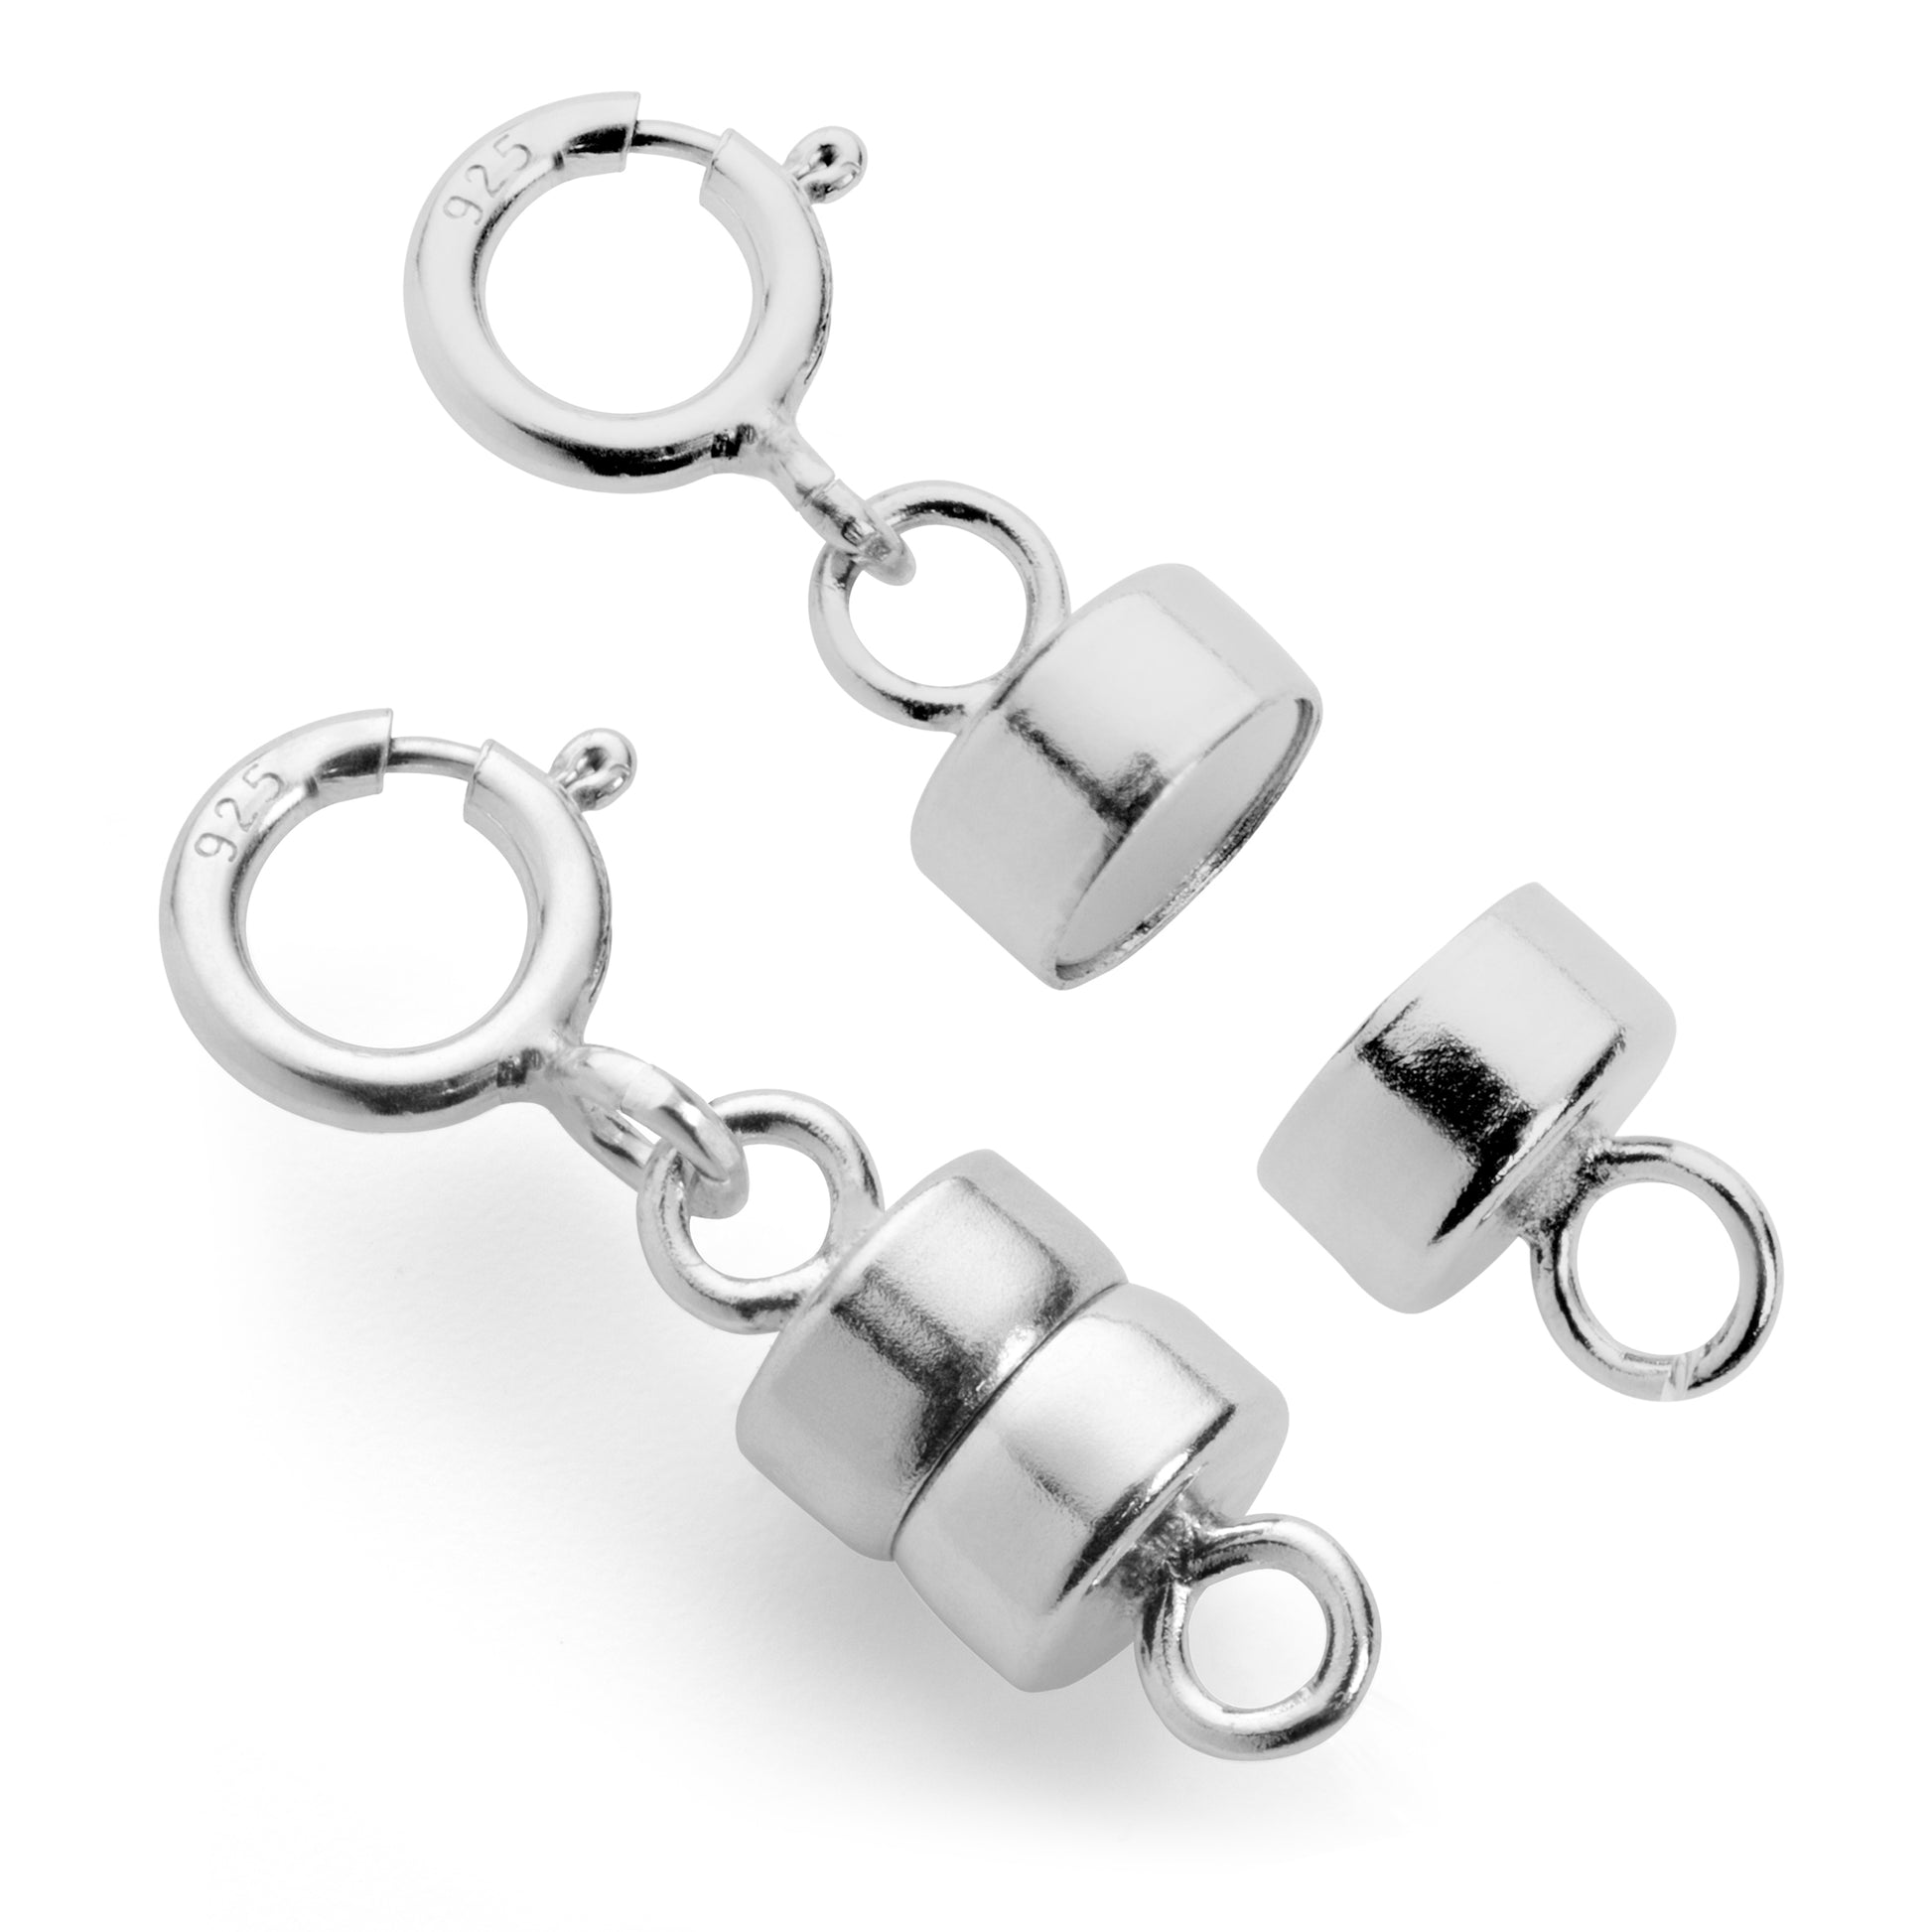 Magnetic Clasp Converter for Small Necklace or Bracelet Sterling Silver / Single